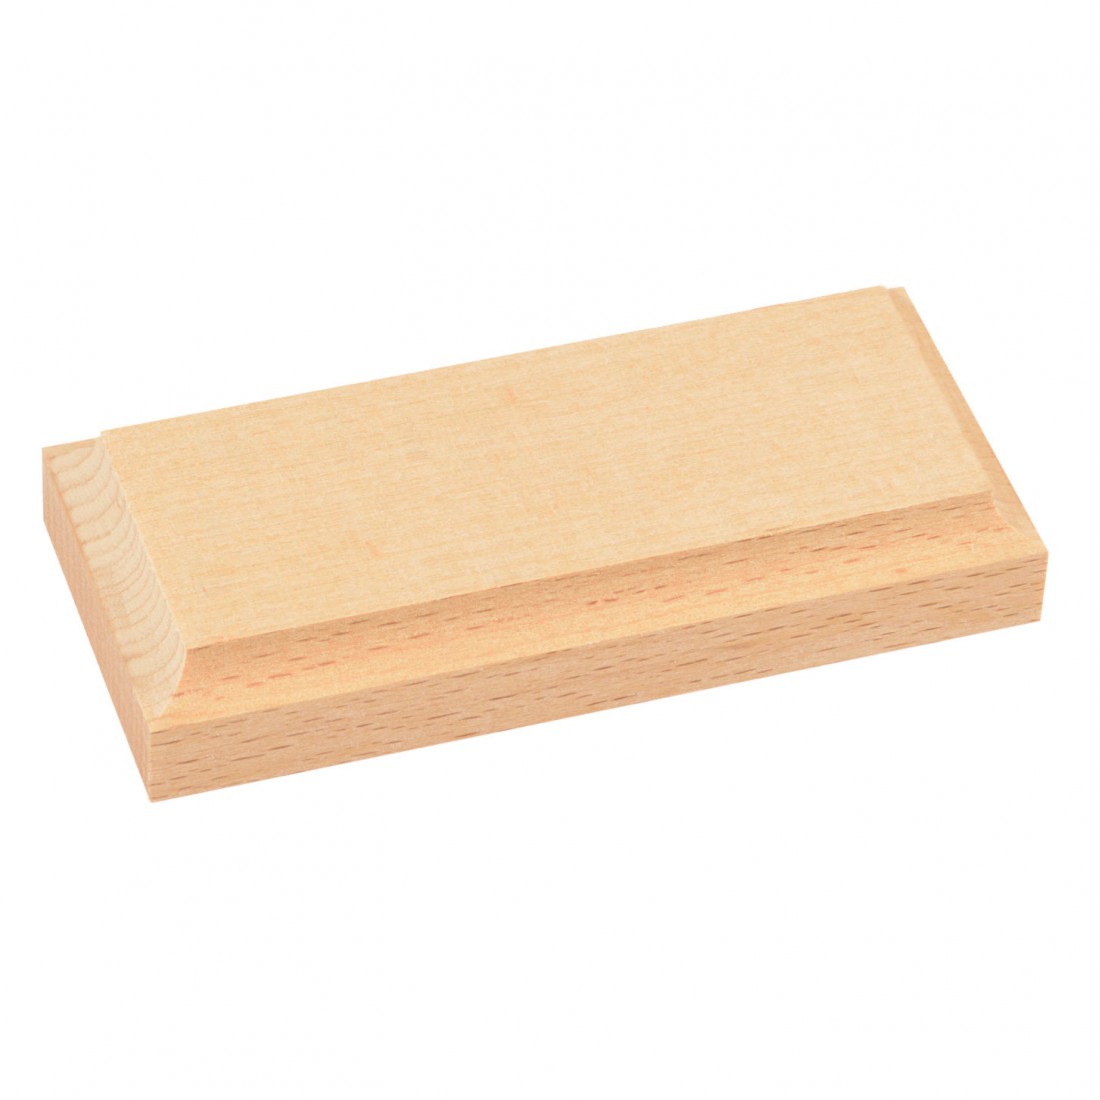 Wooden Base 90x40 mm